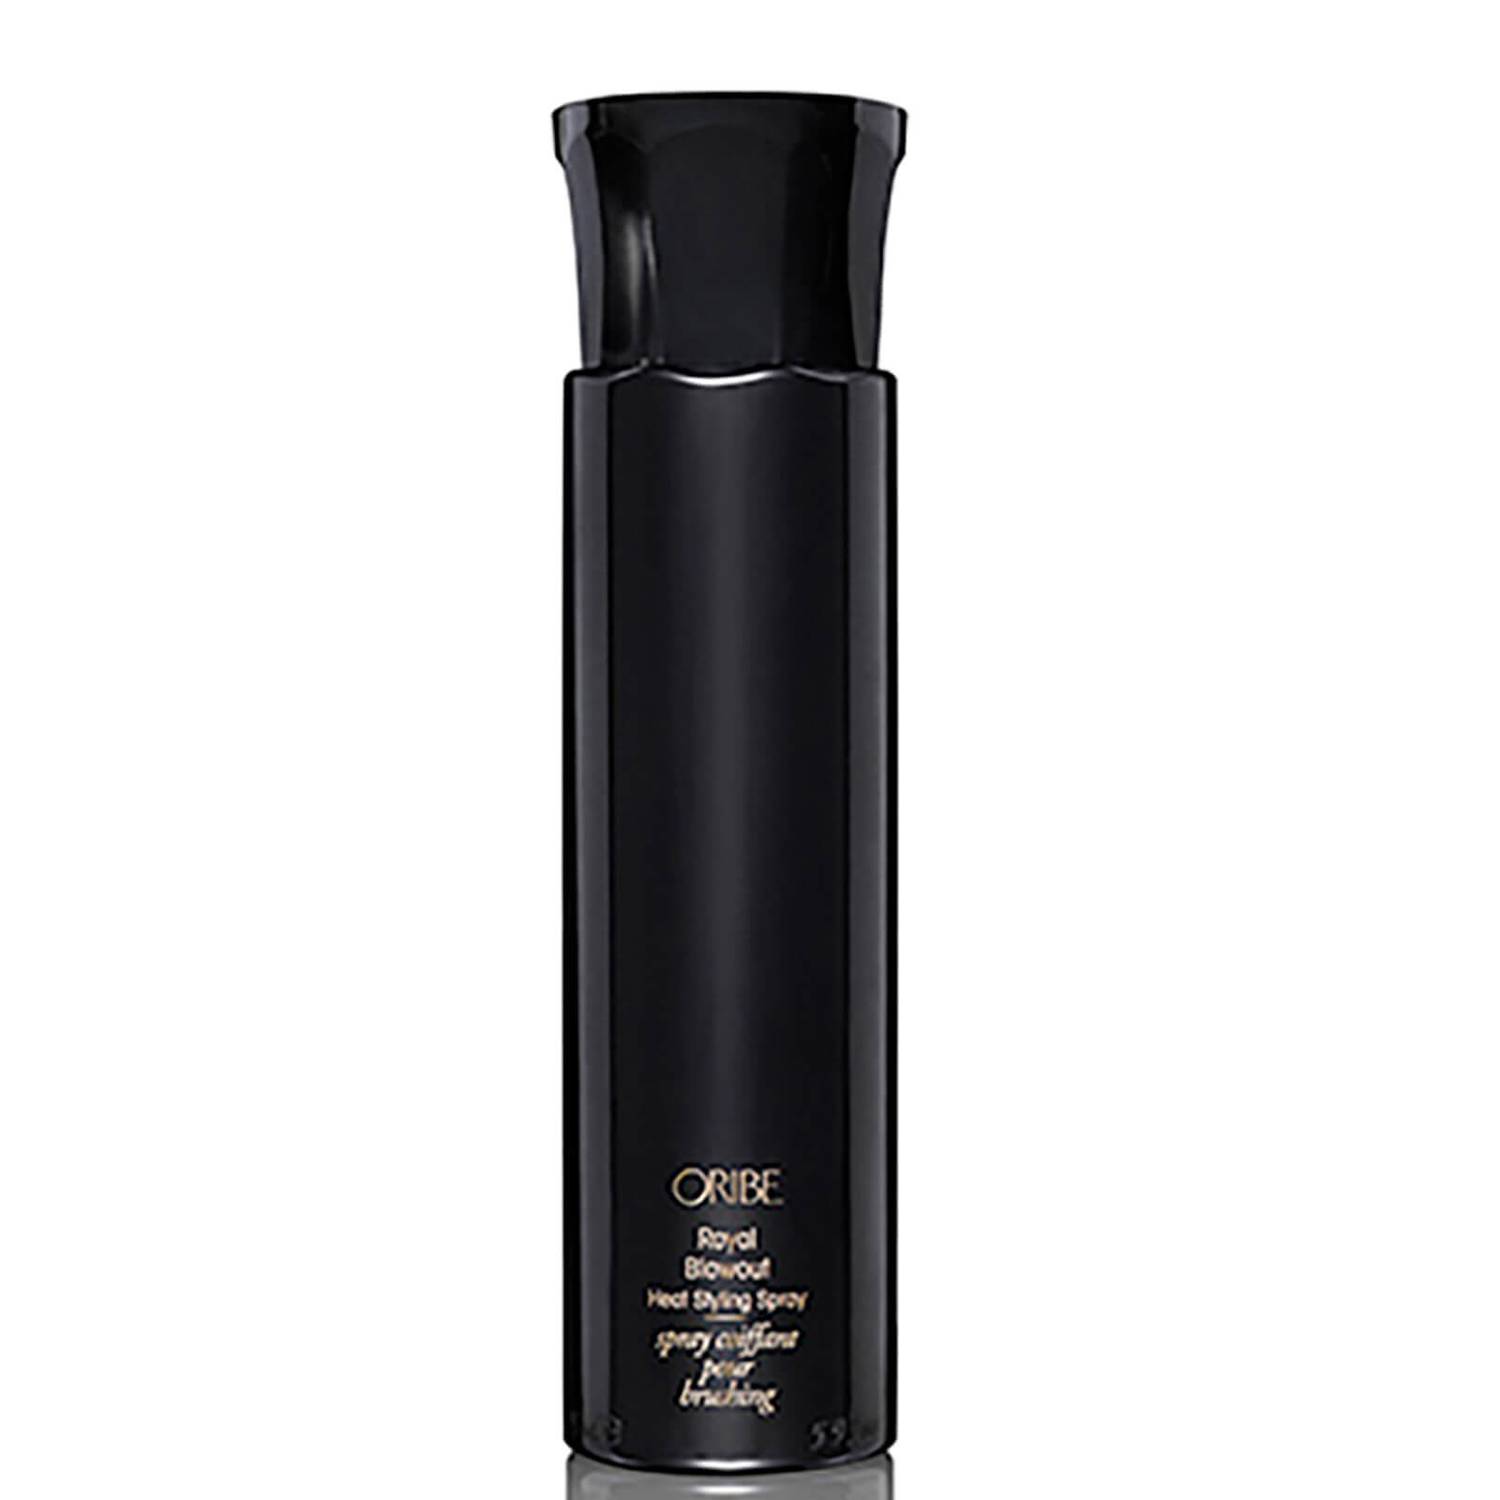 Oribe Royal Blowout Heat Protectant